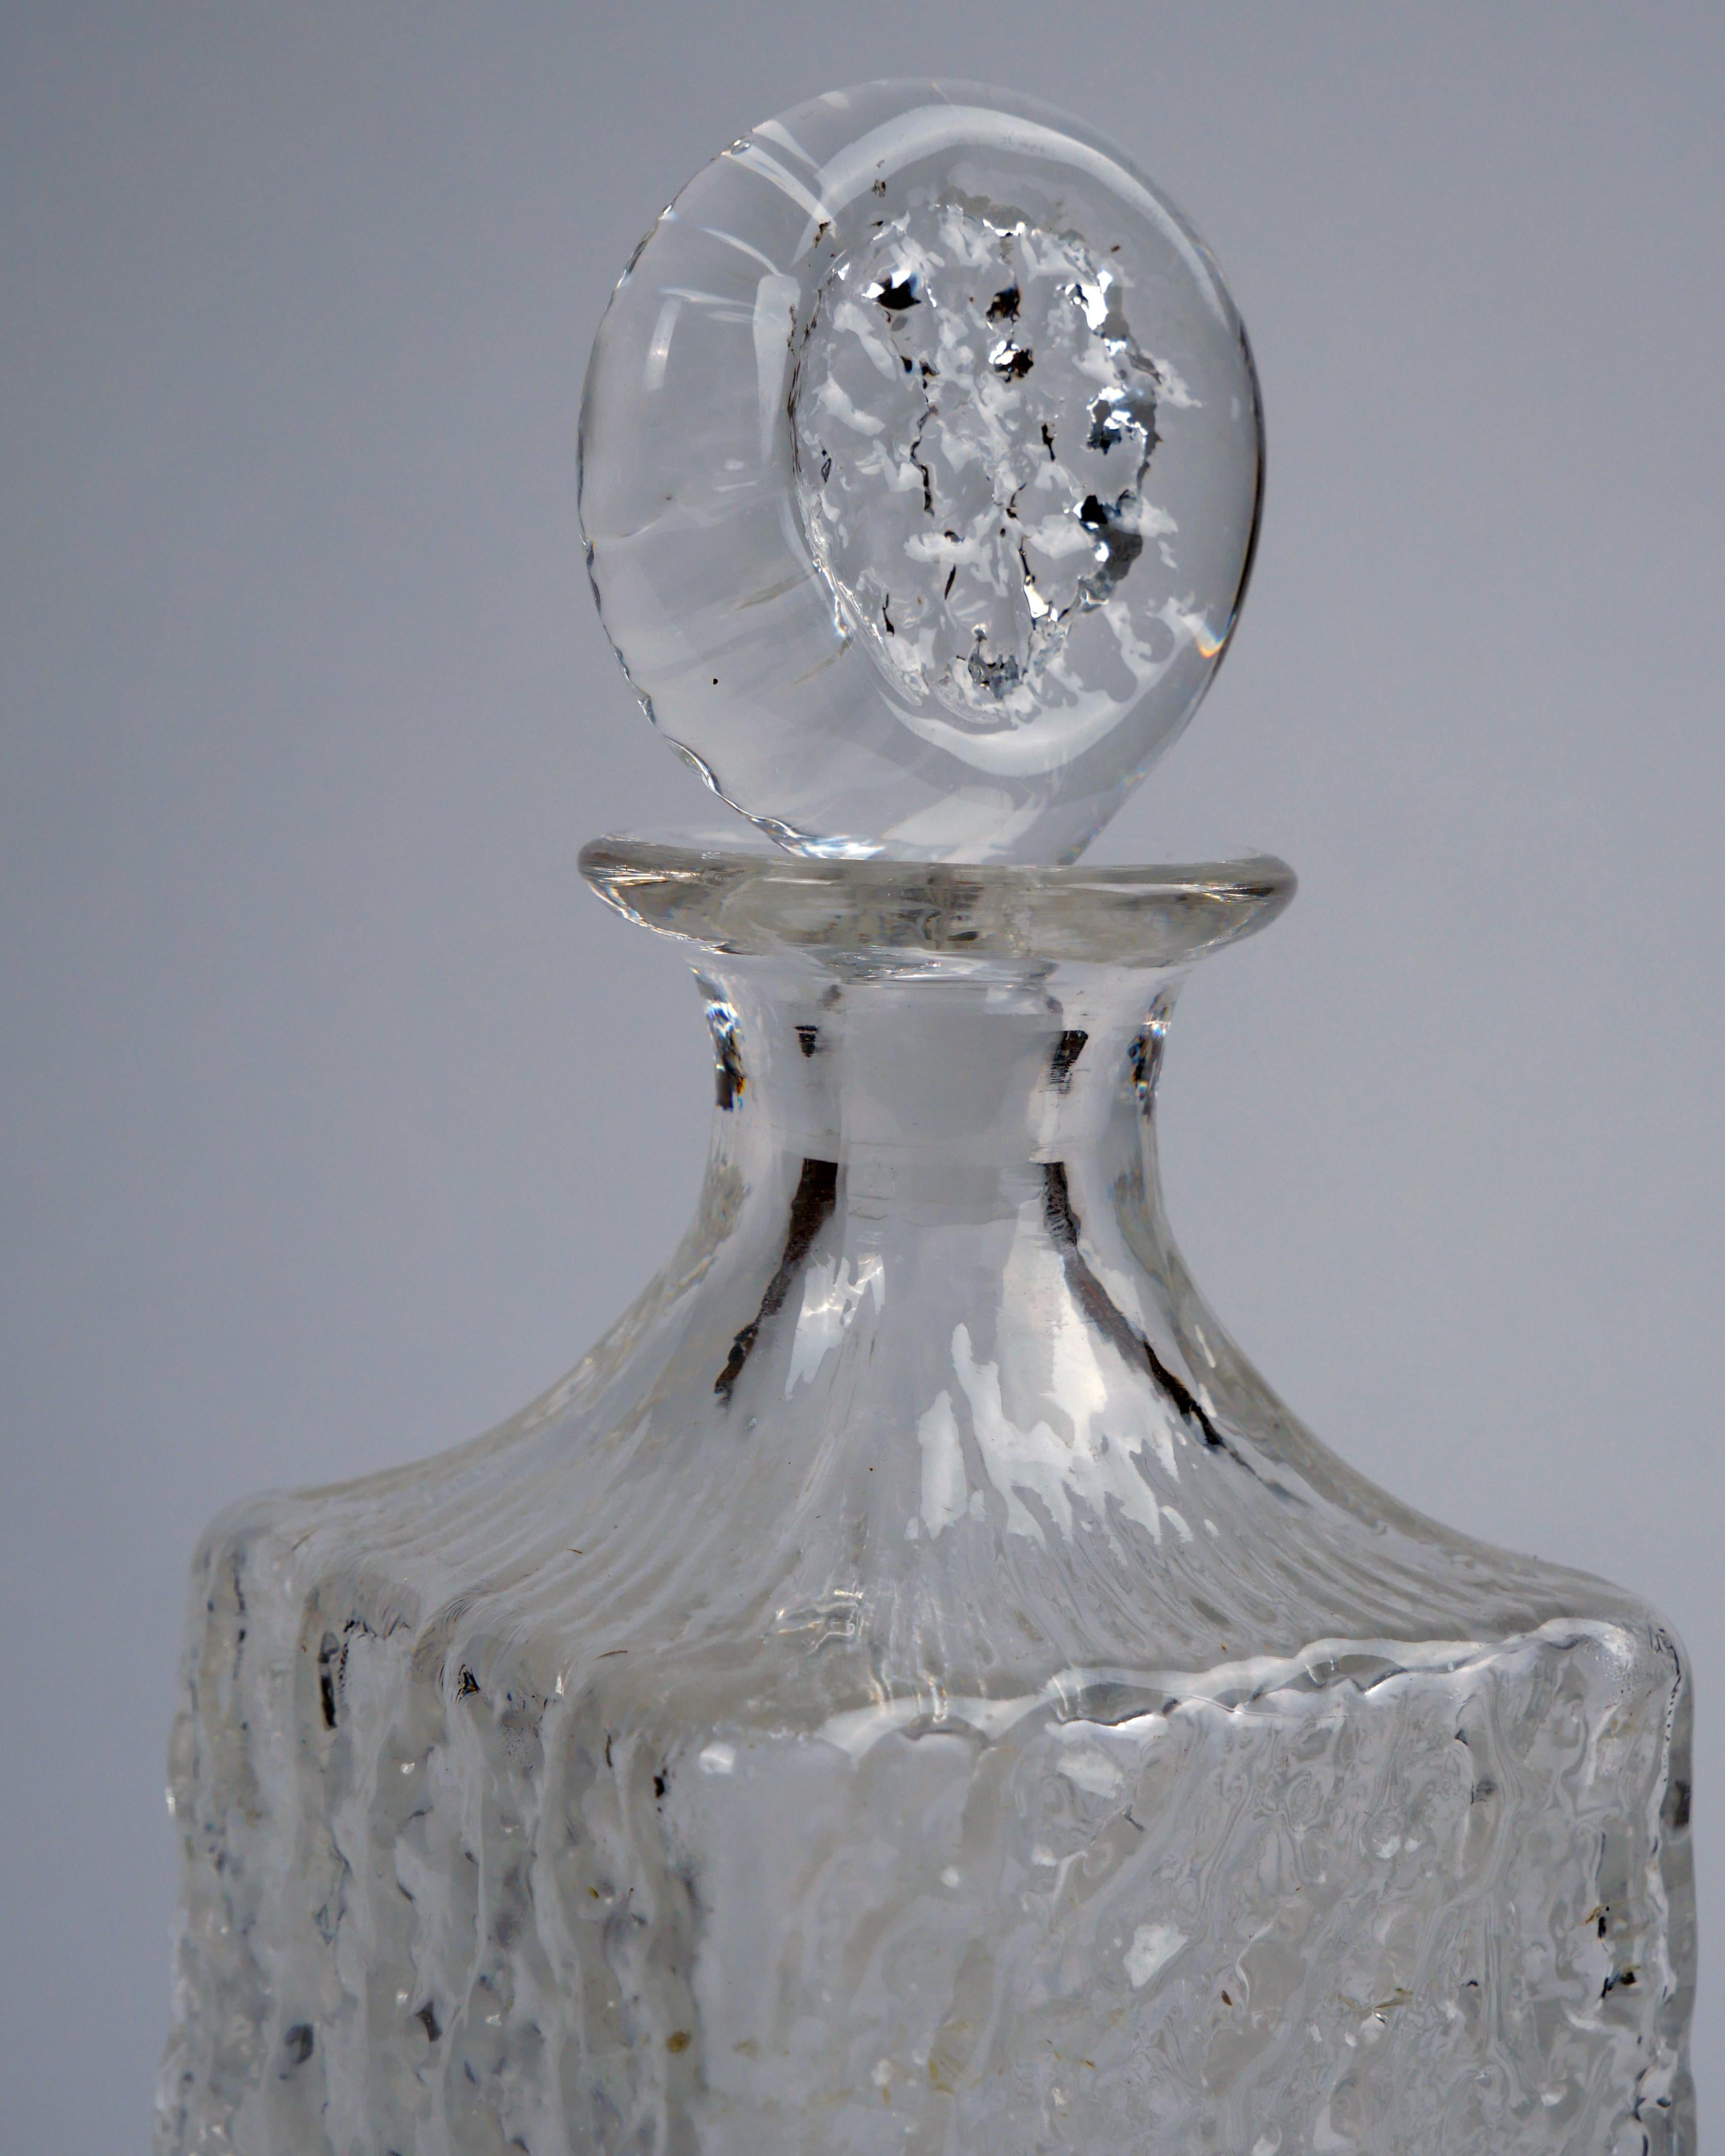 whitefriars decanter